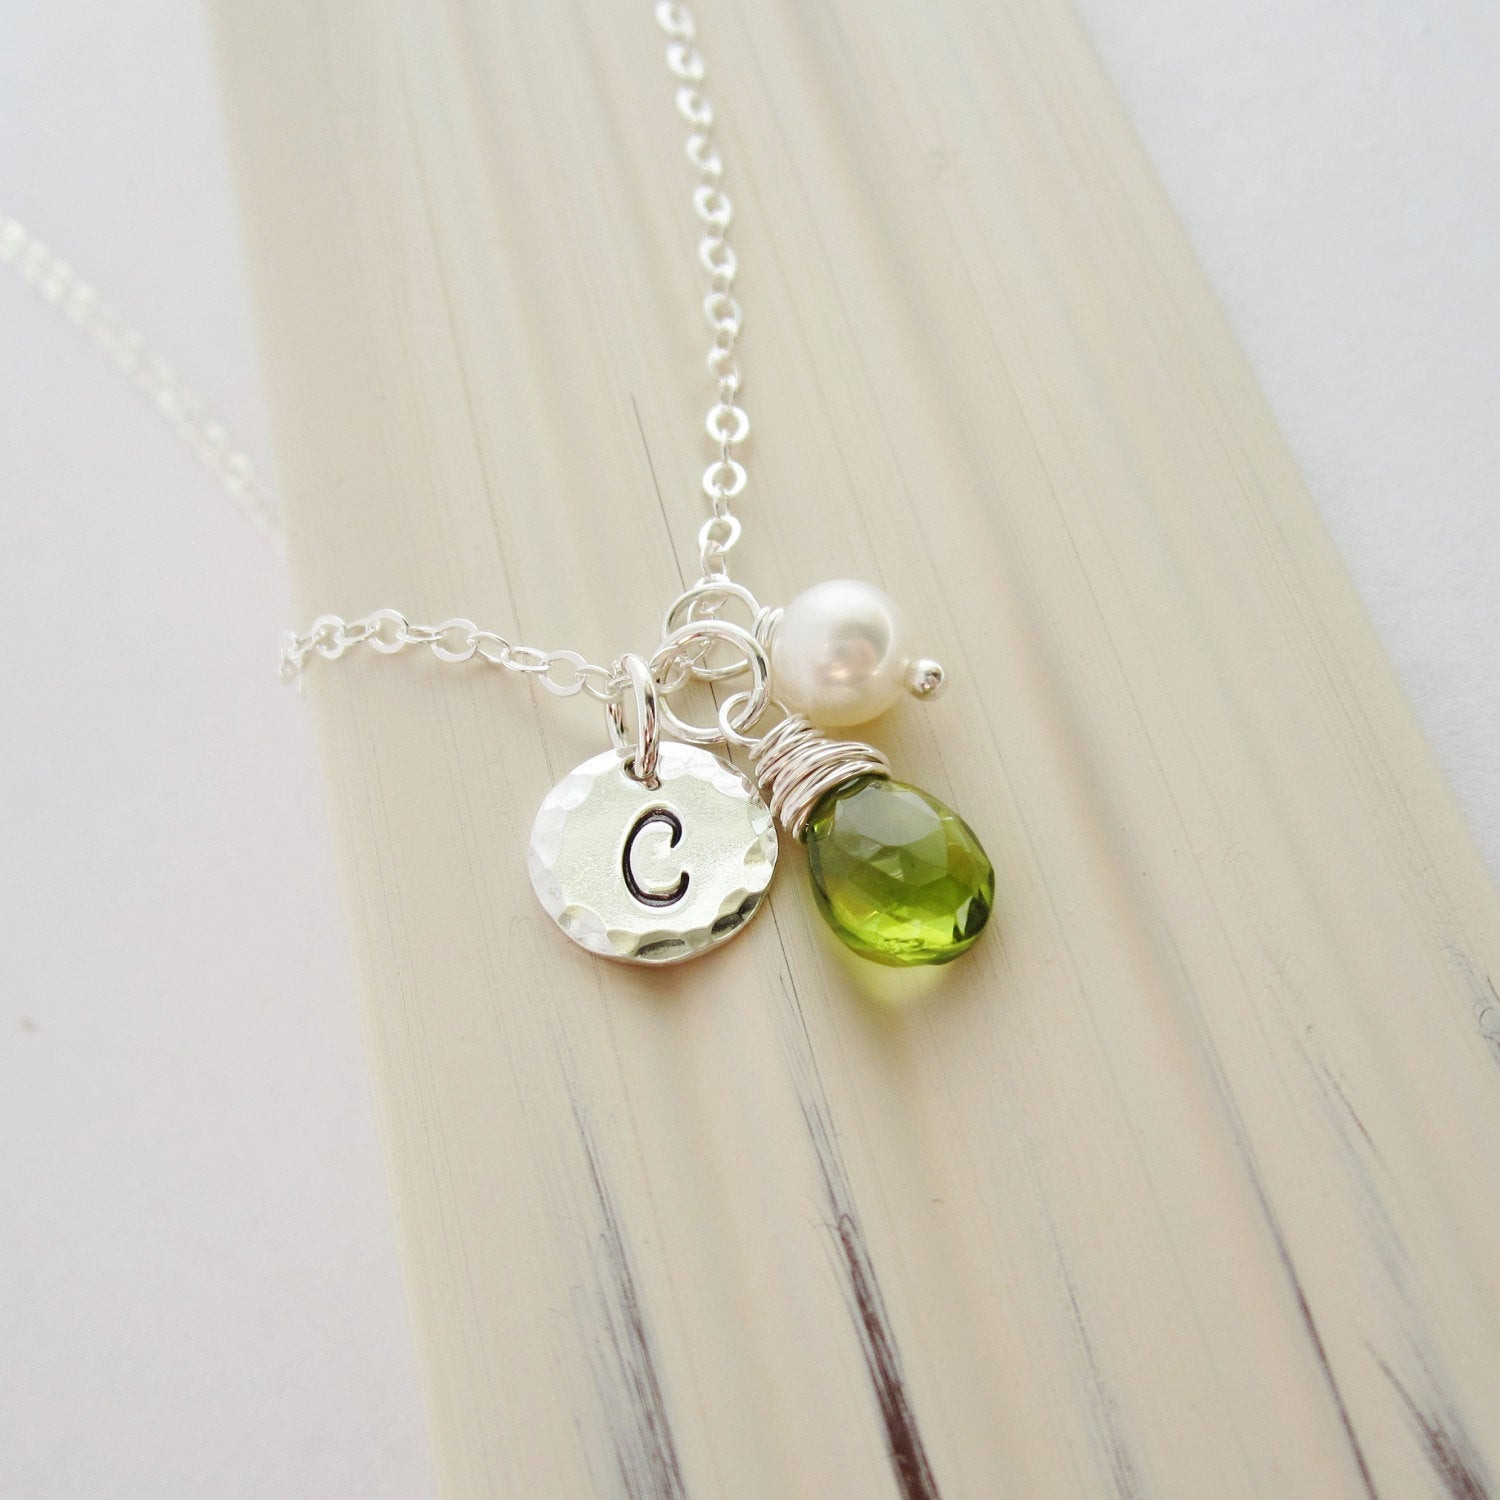 August Birthstone Necklace
 August birthstone necklace personalized green peridot